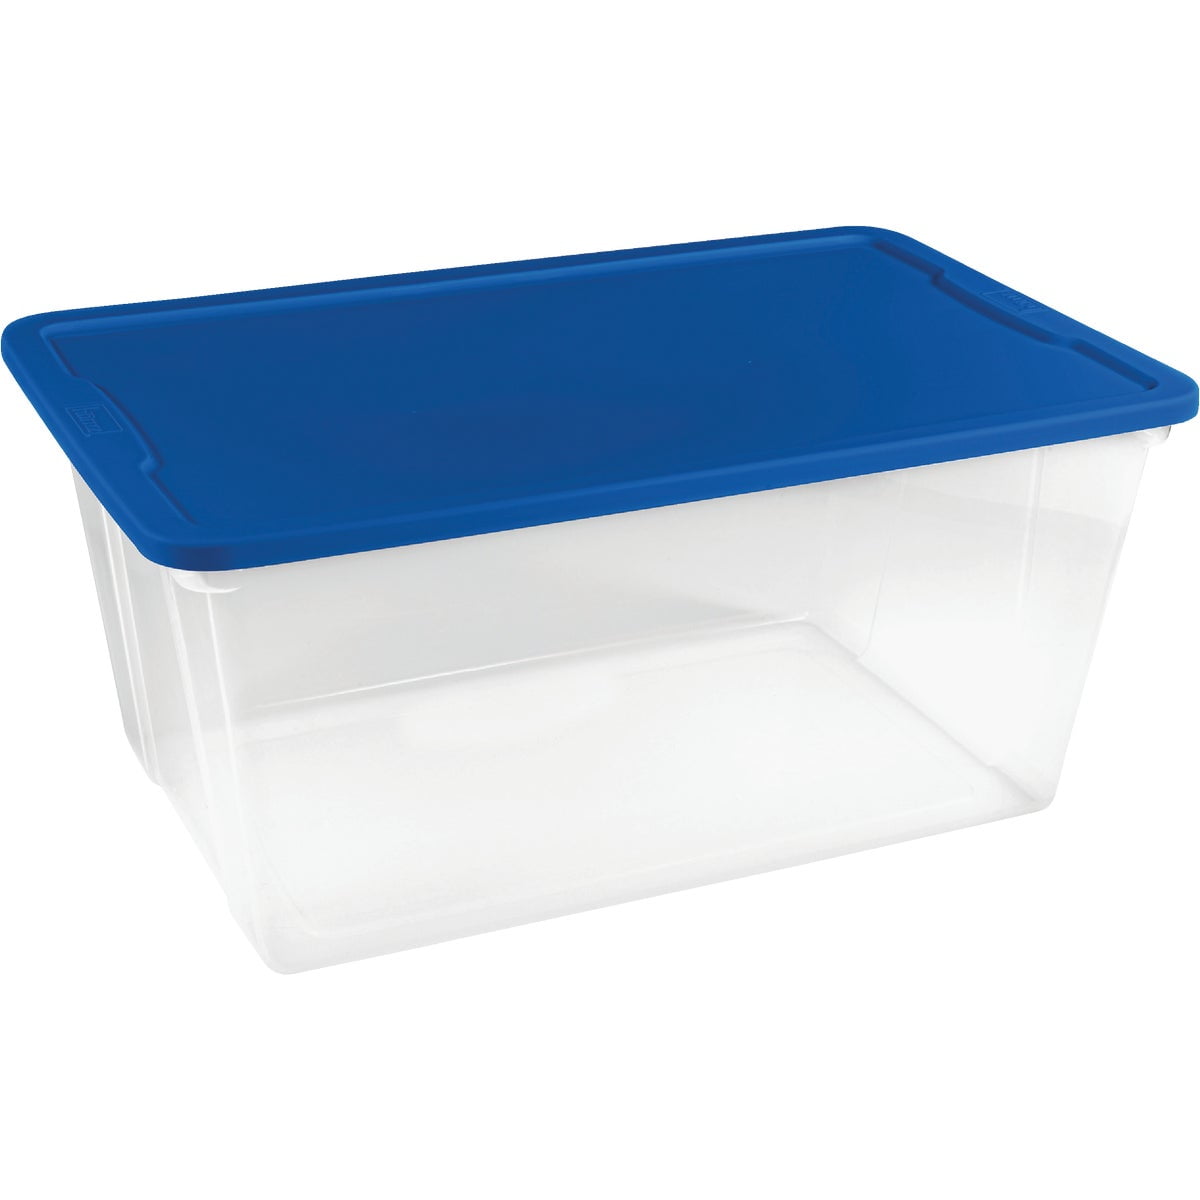 12 Pack Details about   Life Story 5.5 Quart Rectangular Blue Plastic Protective Storage Tote 